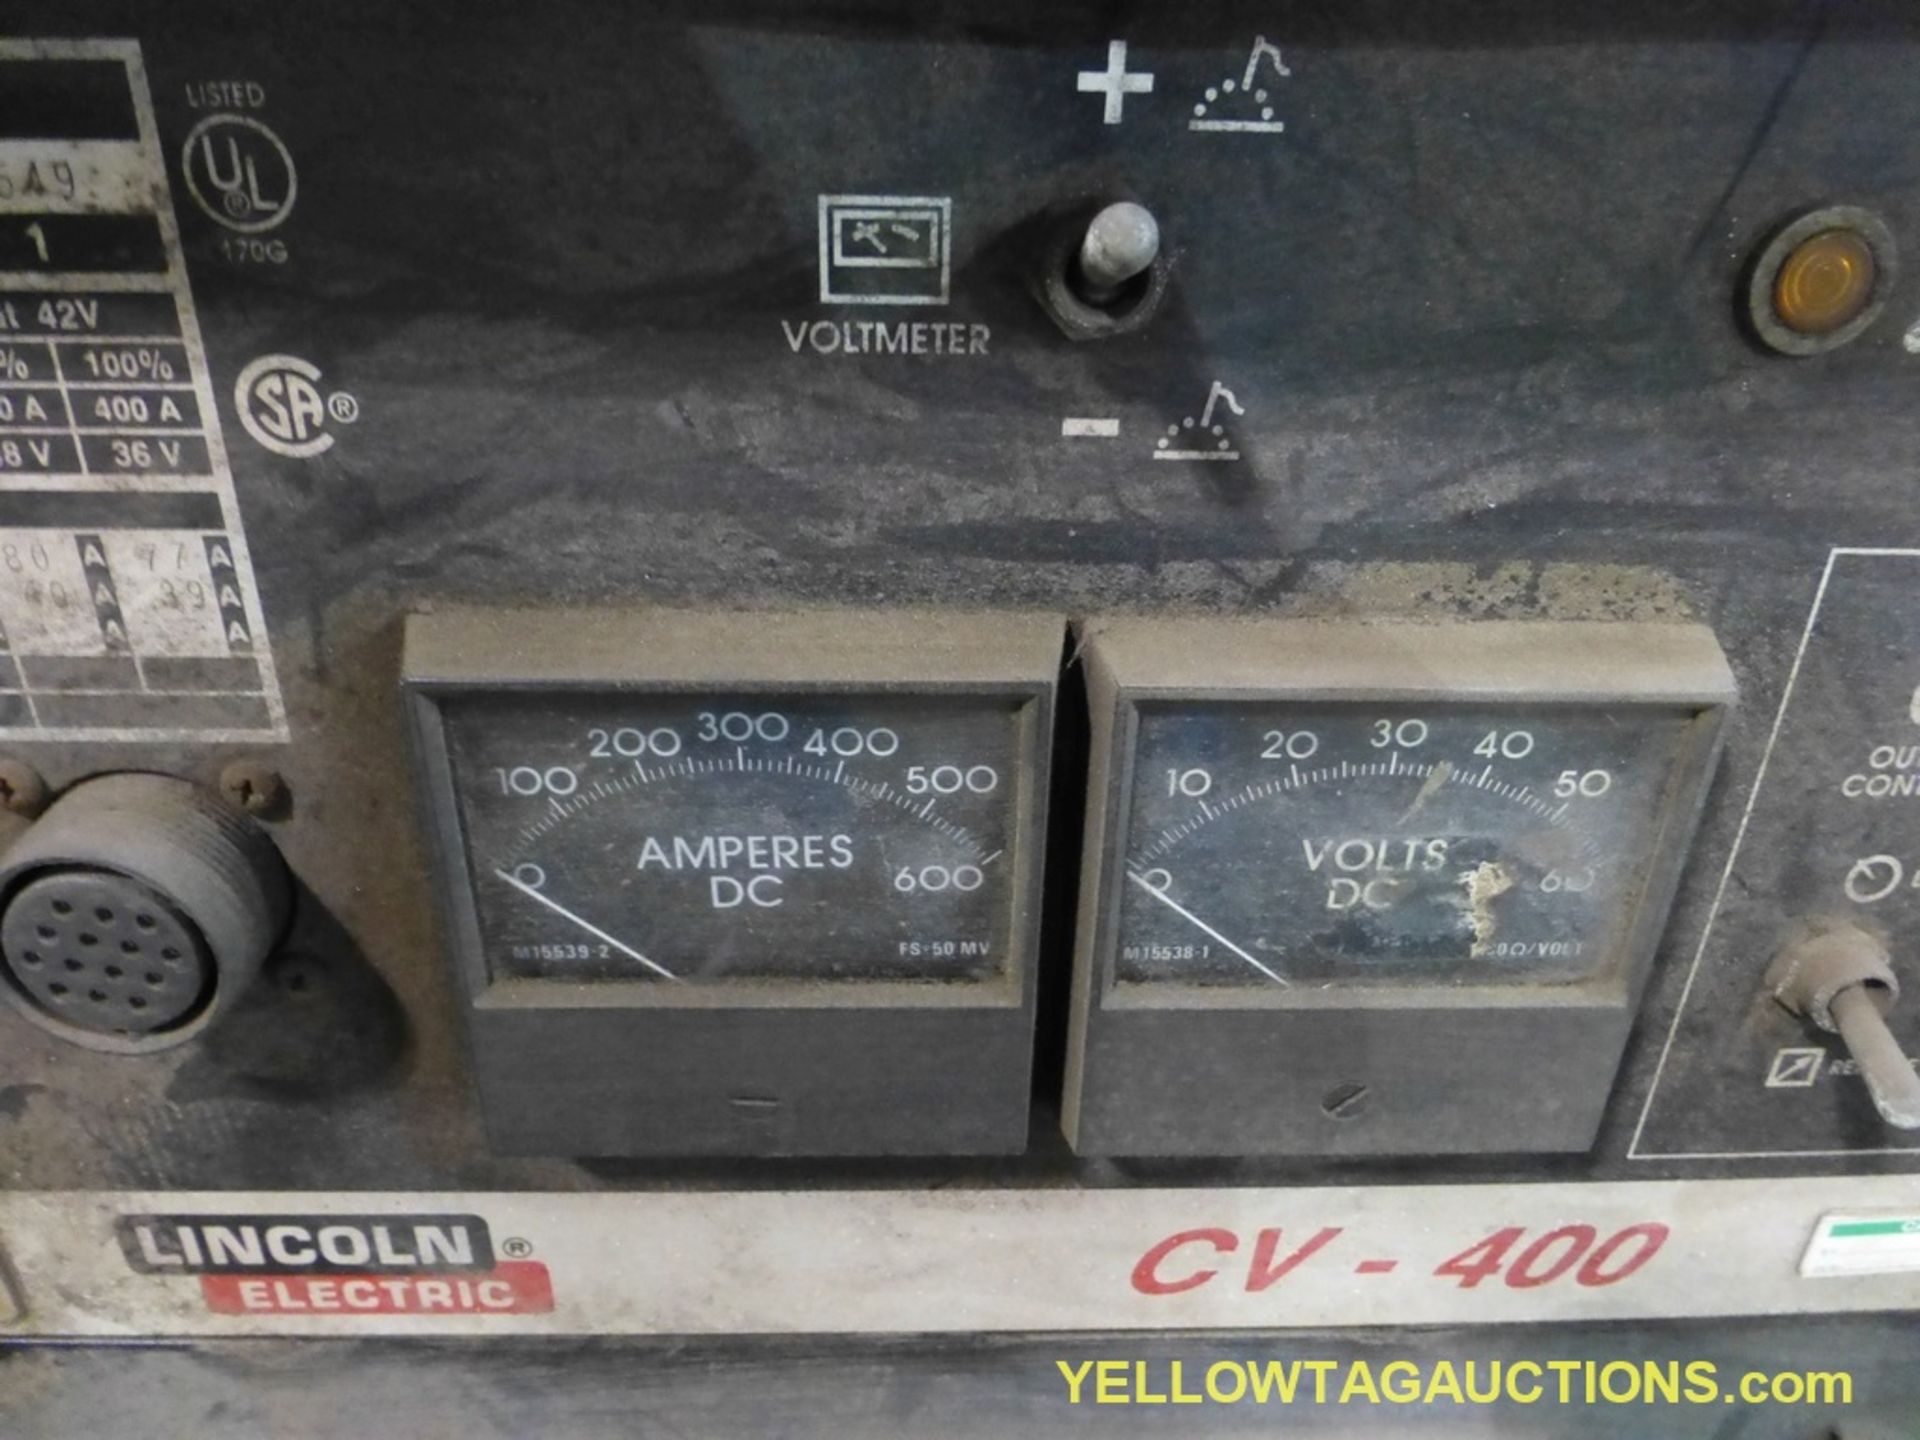 Lot of (2) Lincoln Electric CV-400 Welder | Model No. CV-400; Code: 10084M; 60A at 12V to 500A at 42 - Image 7 of 8